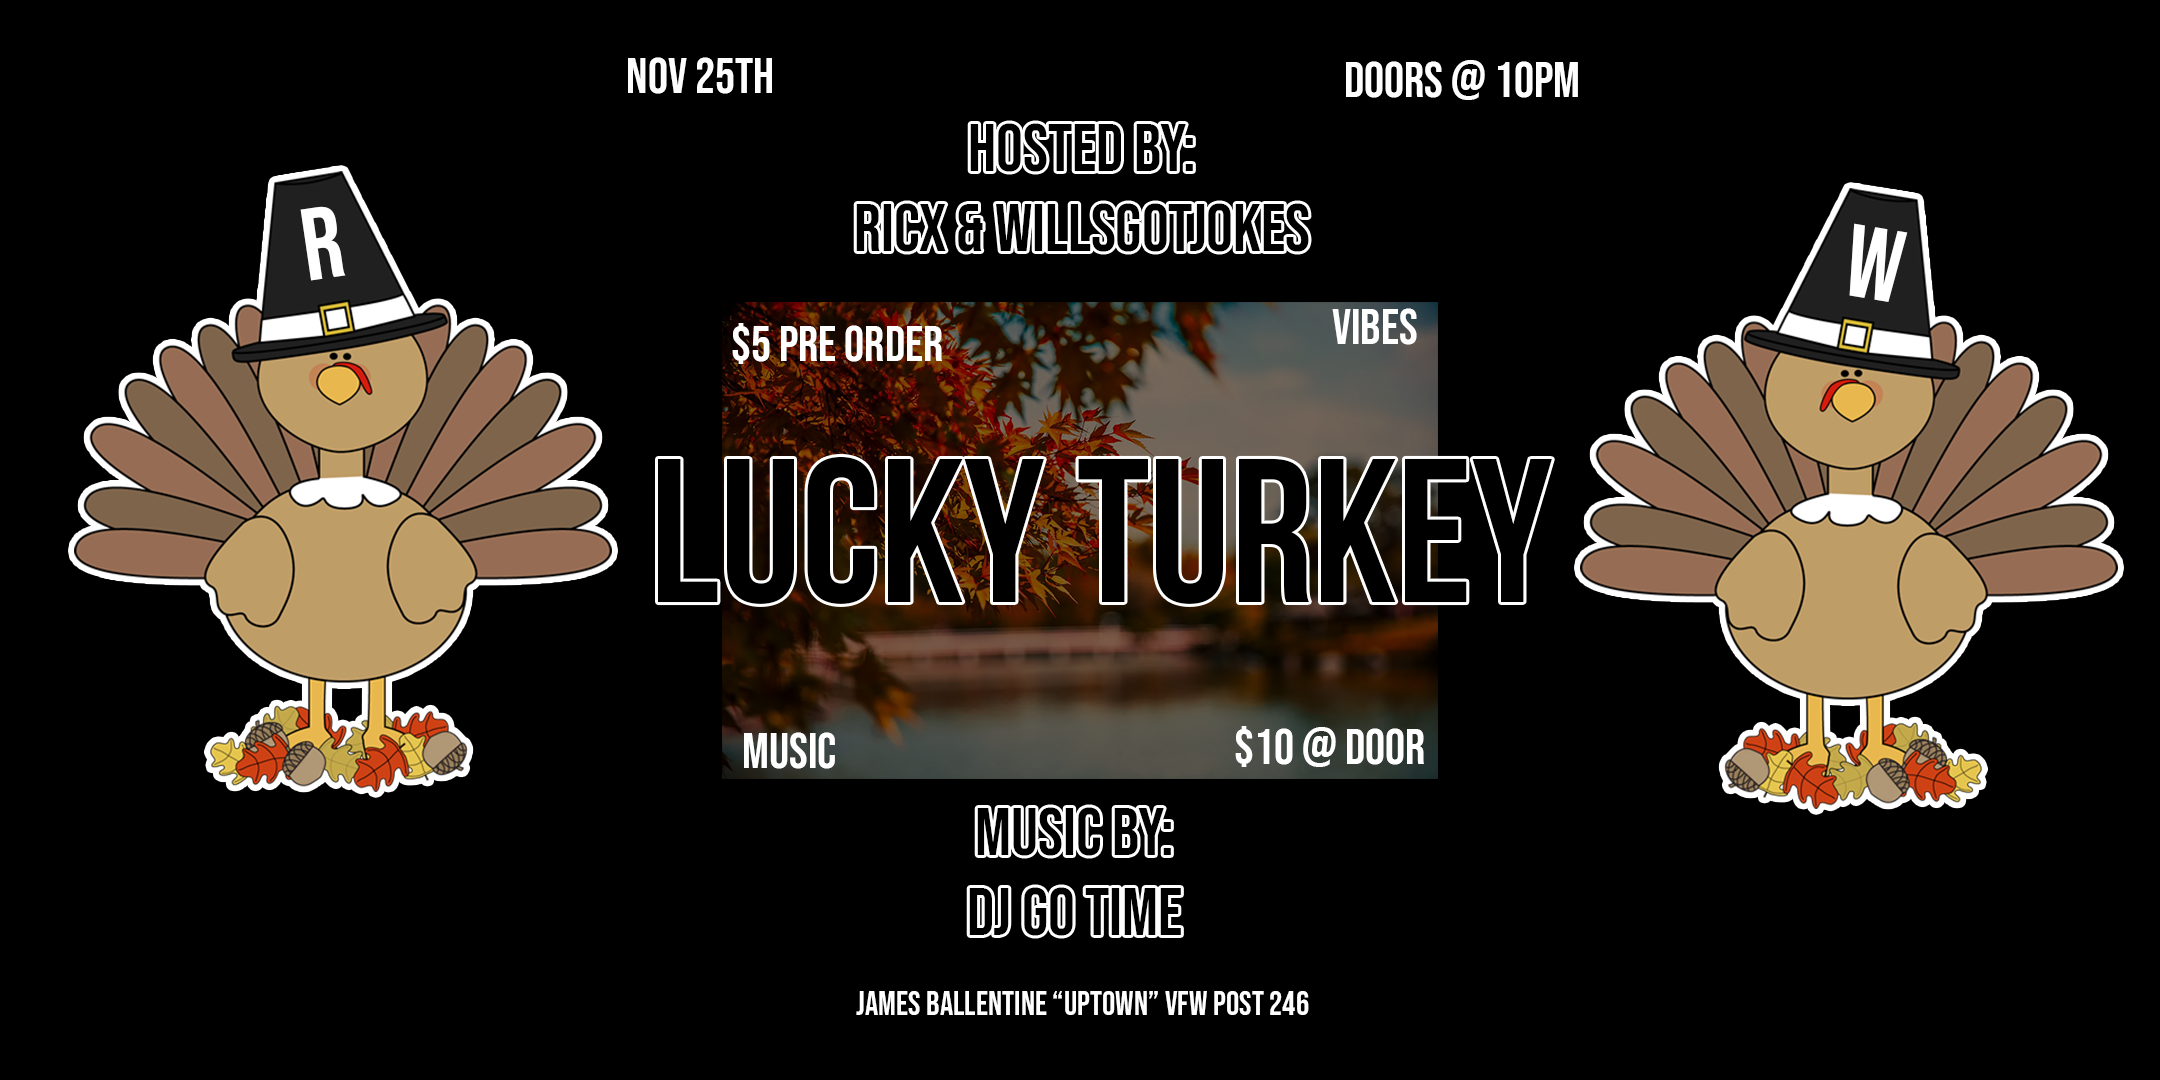 Lucky Turkey Dance Party Hosted by: RicX, Willsgotjokes Music by: DJ Go Time Saturday November 25 James Ballentine "Uptown" VFW Post 246 2916 Lyndale Ave S Mpls Doors 10pm :: Music 10pm :: 21+ GA: $5 ADV / $10 DOS